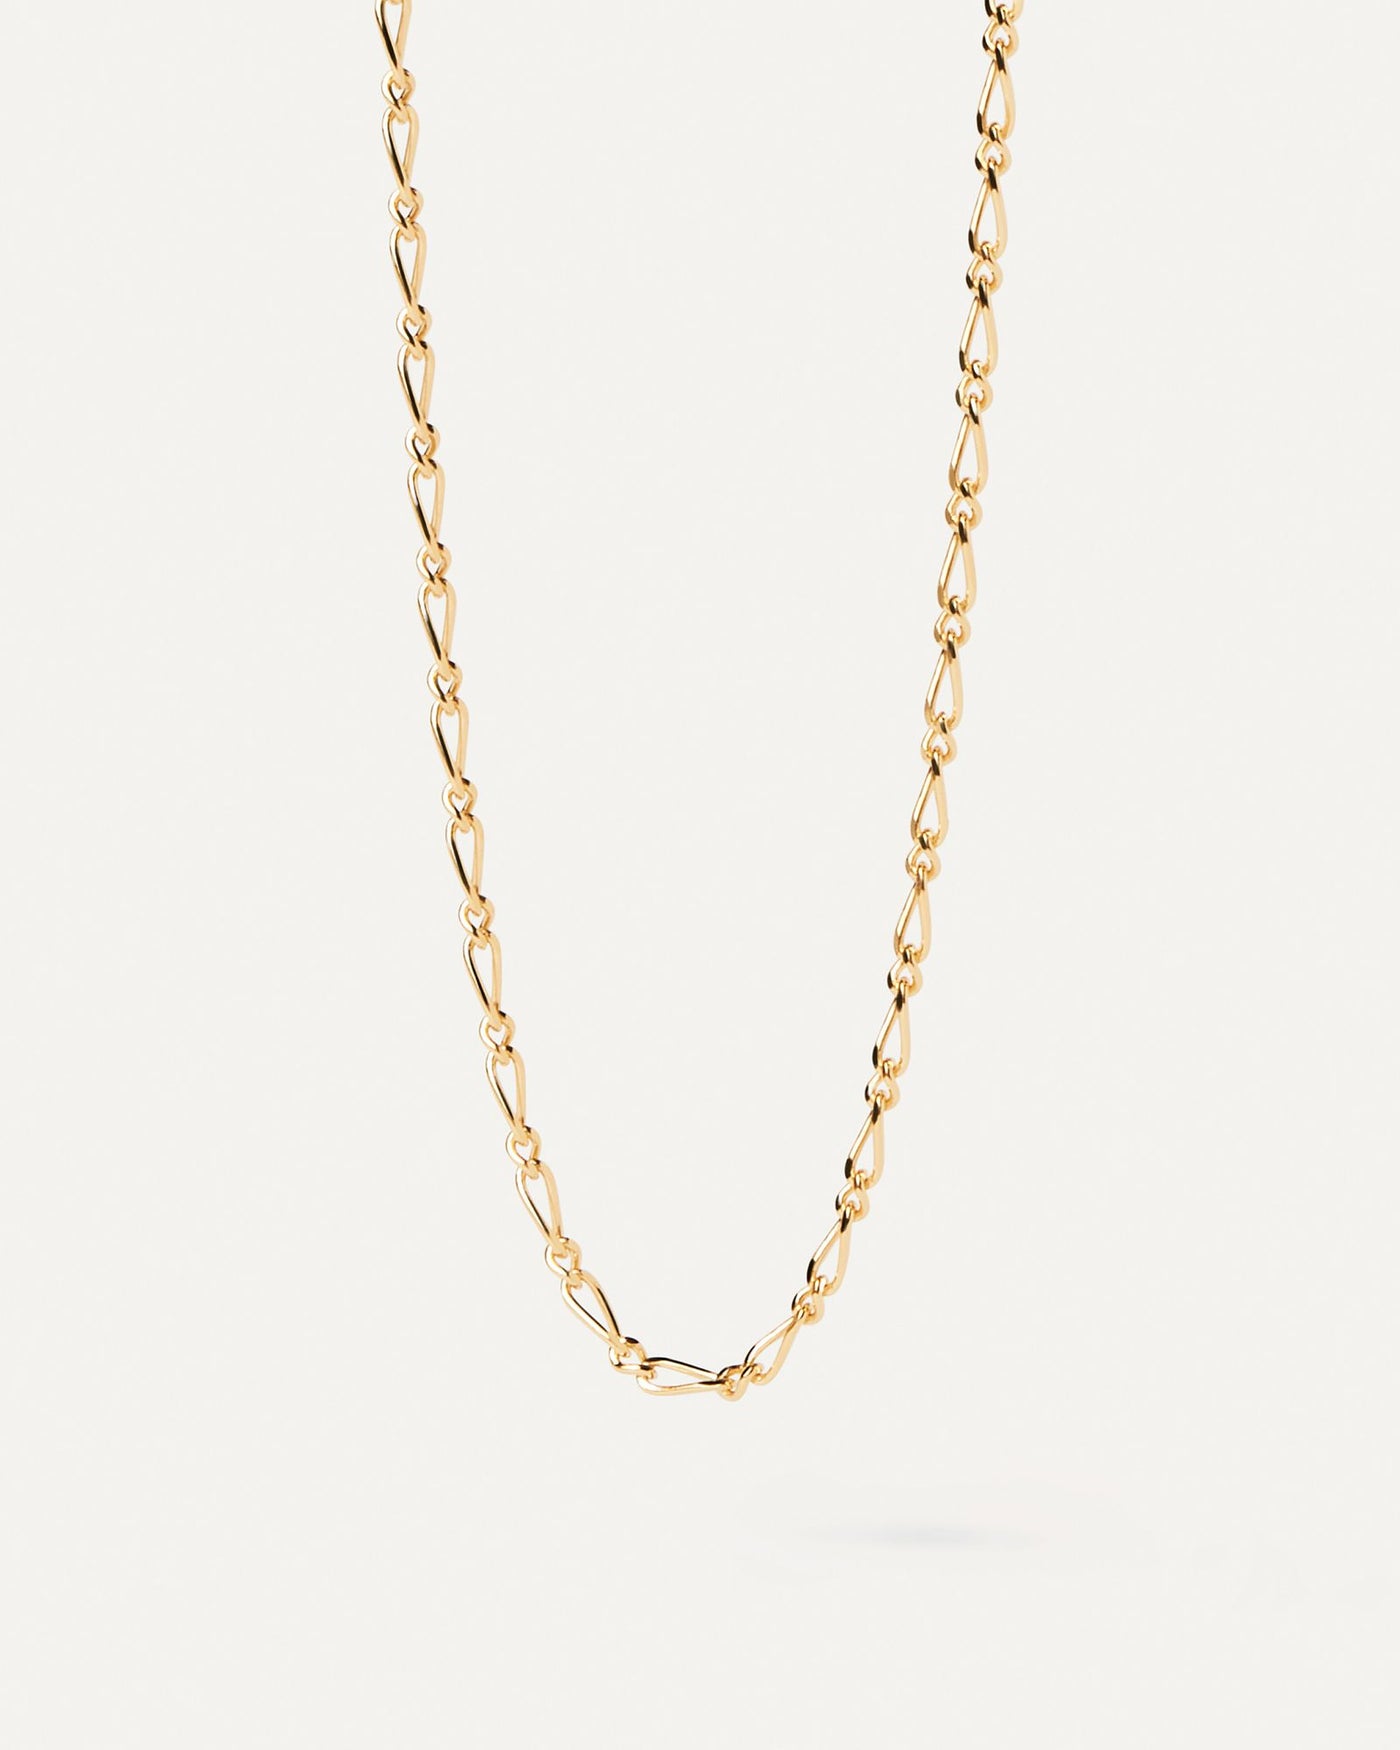 2024 Selection | Adele Chain Necklace. Gold-plated sleek chain necklace with intertwined asymmetric links. Get the latest arrival from PDPAOLA. Place your order safely and get this Best Seller. Free Shipping.